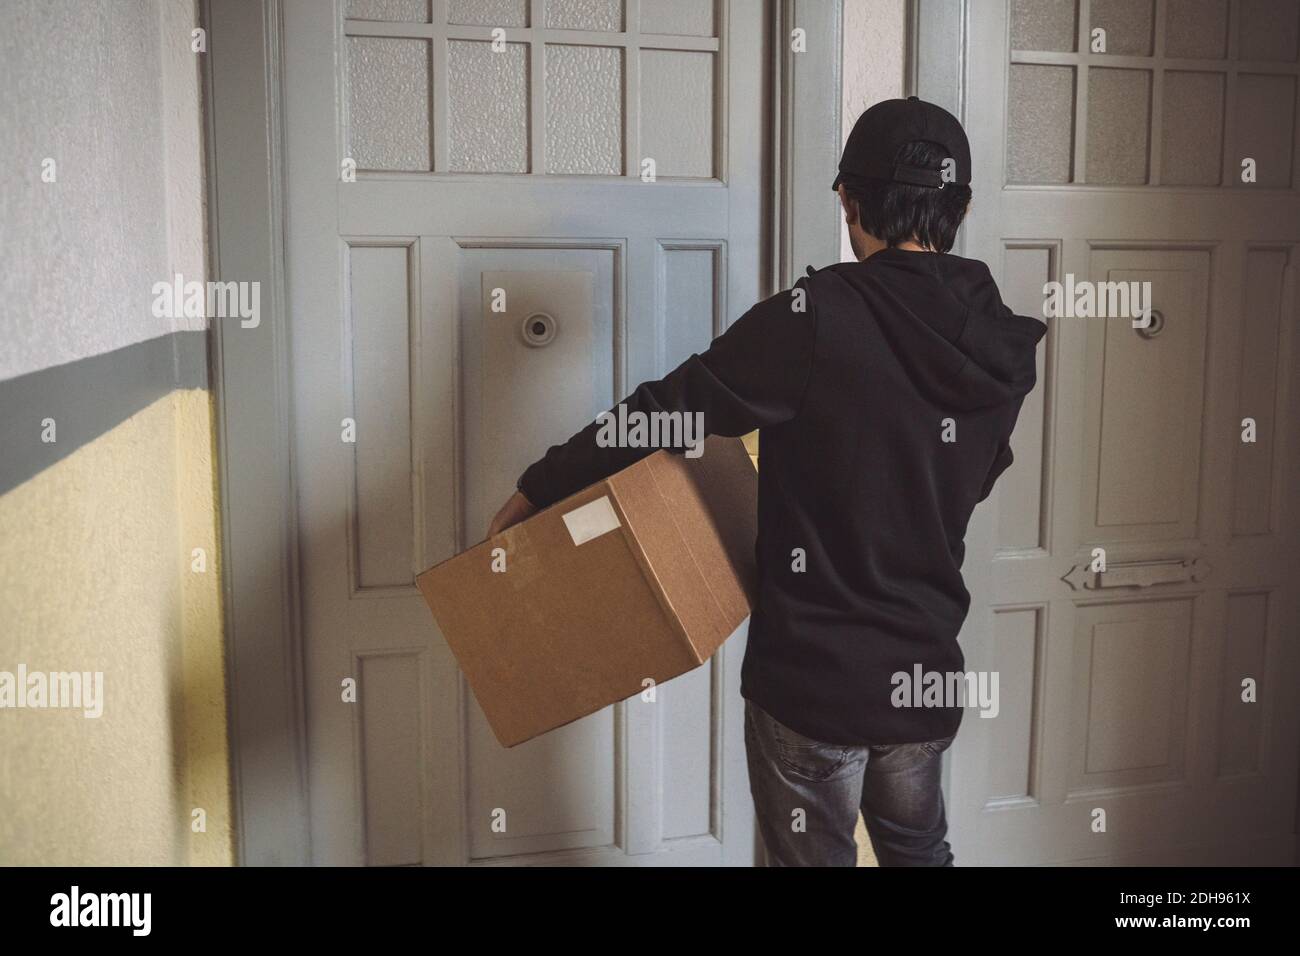 Rear view of delivery man with package standing at doorstep Stock Photo